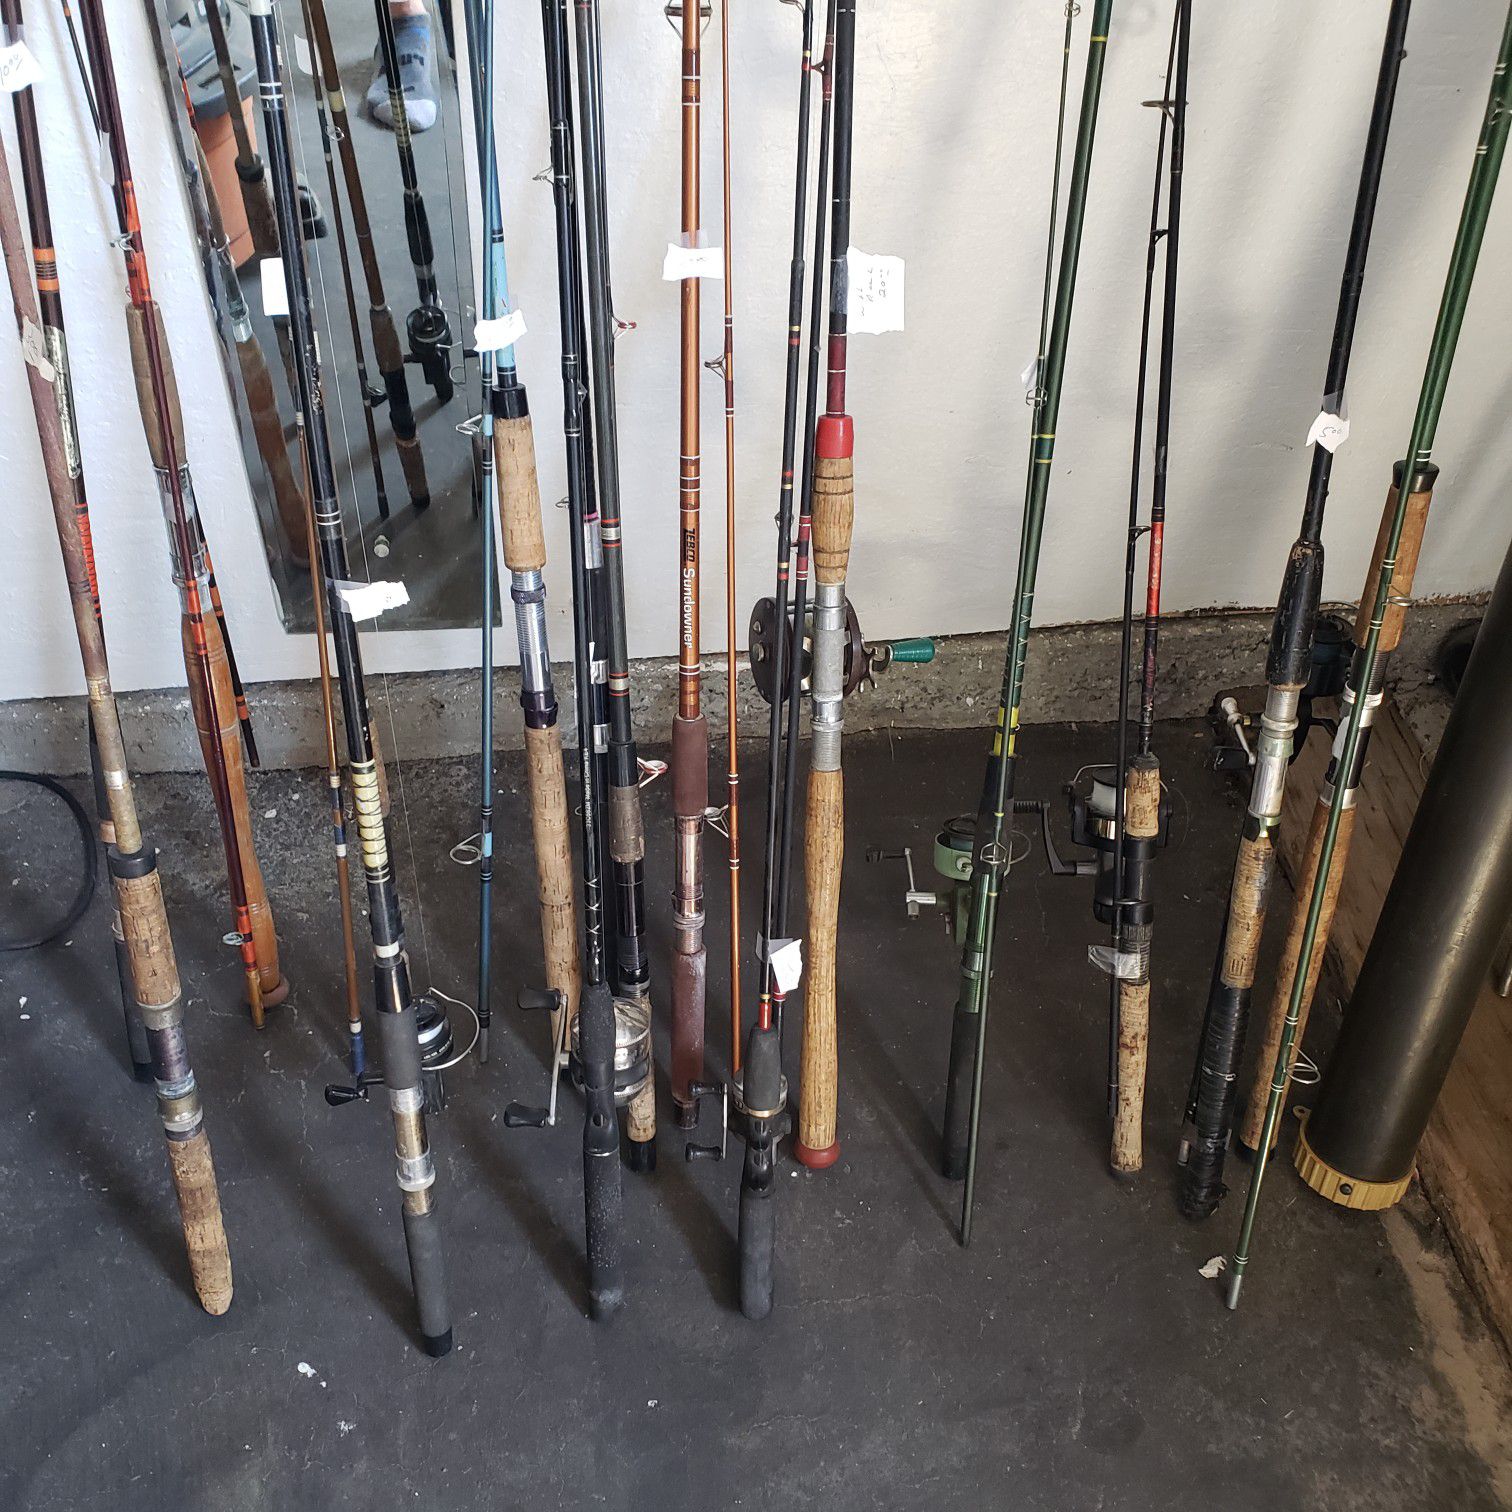 Have some fishing poles ... reels.. gear...